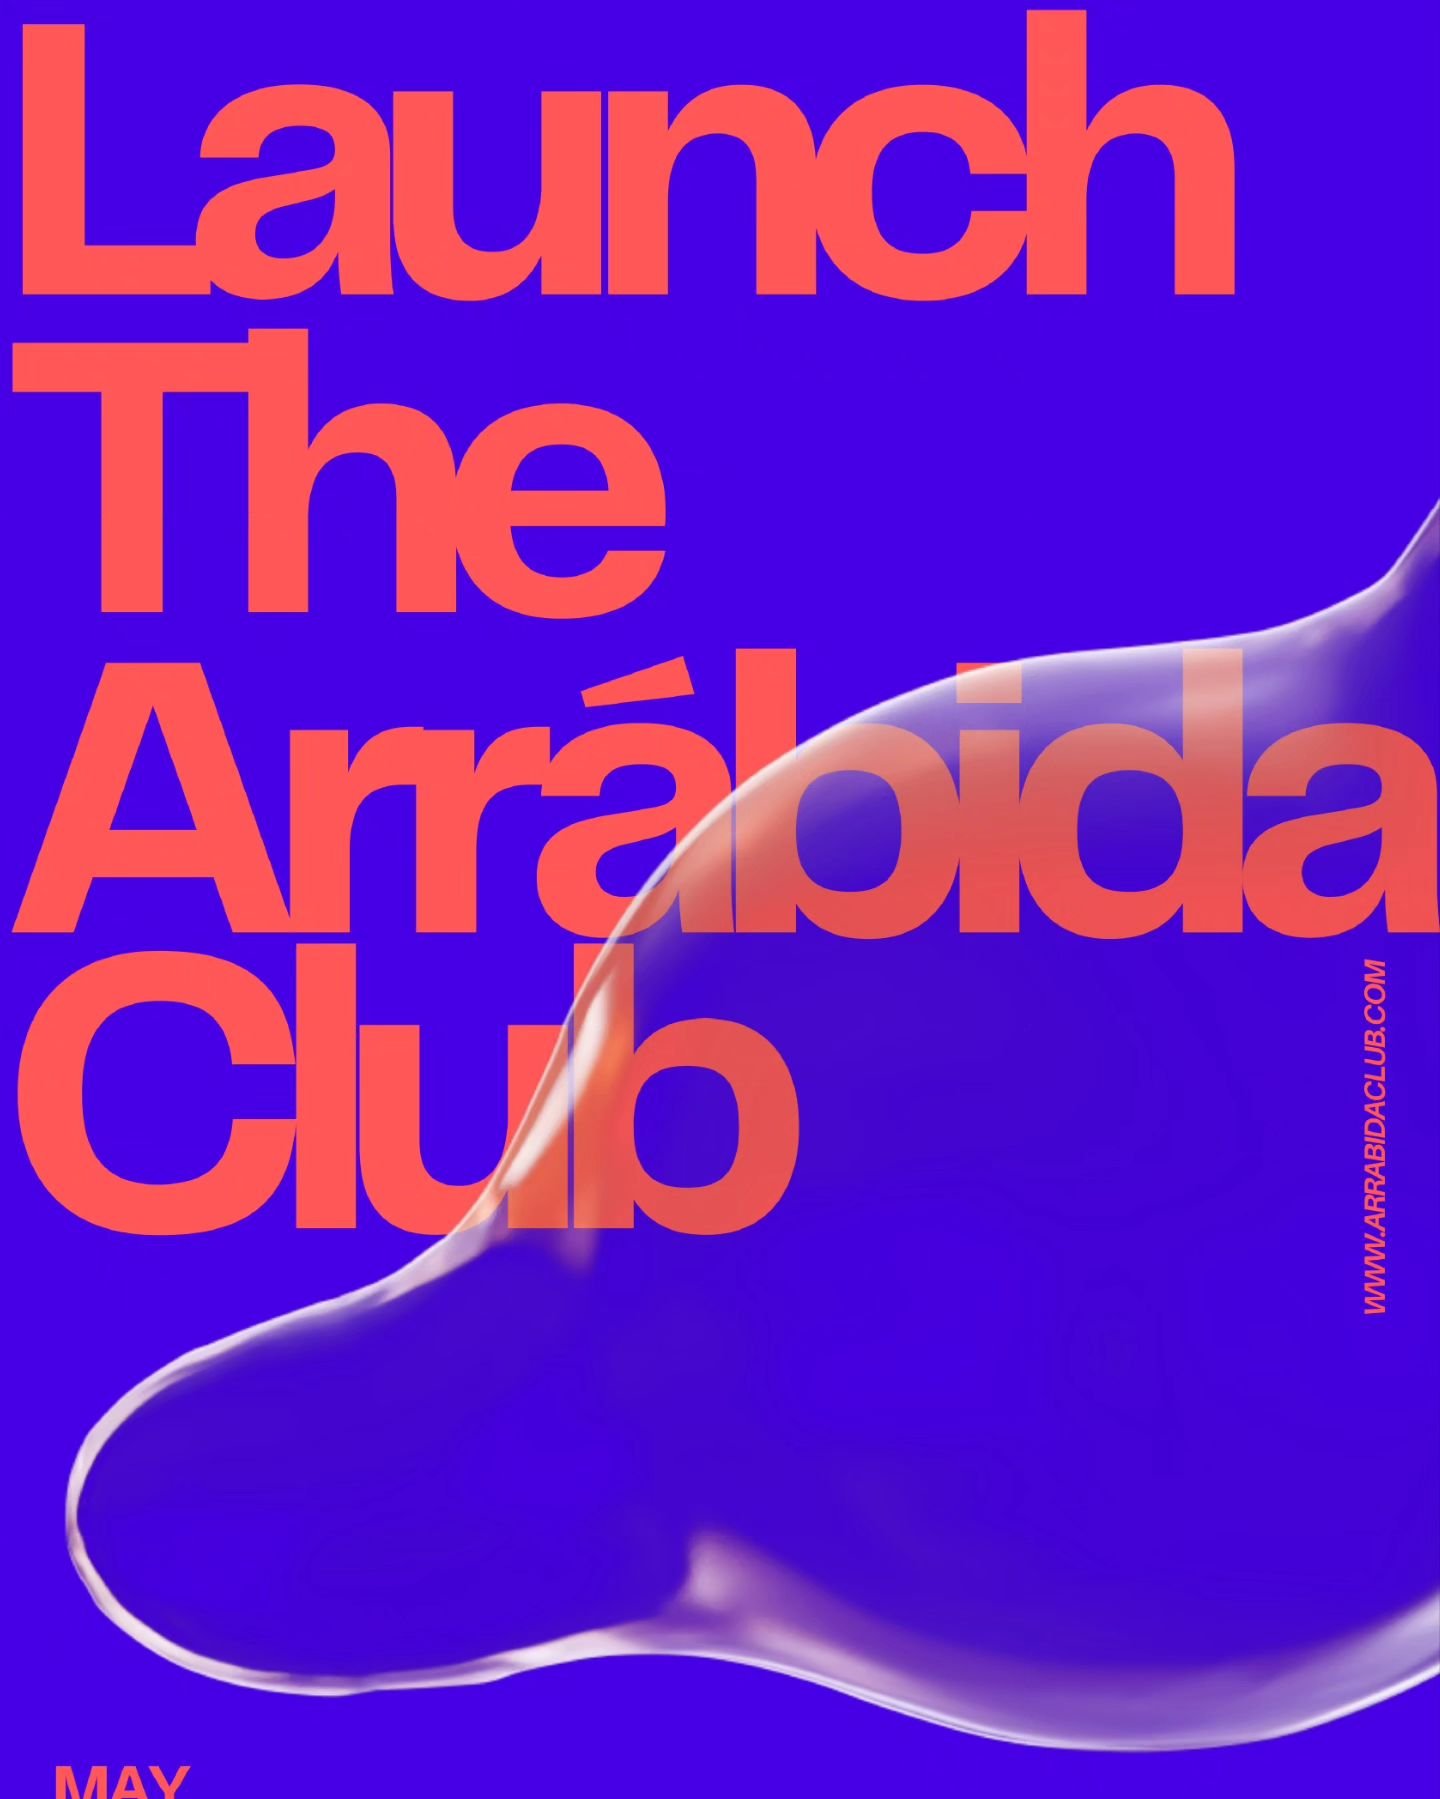 Have you subscribed to the launch of The Arr&aacute;bida Club, a newly born ultimate entrepreneurial social club in our region, this Saturday, 4pm @Sitio Setubal.We look forward to seeing you there.
Link in bio!

#thearrabidaclub #SitioSetubal #entre